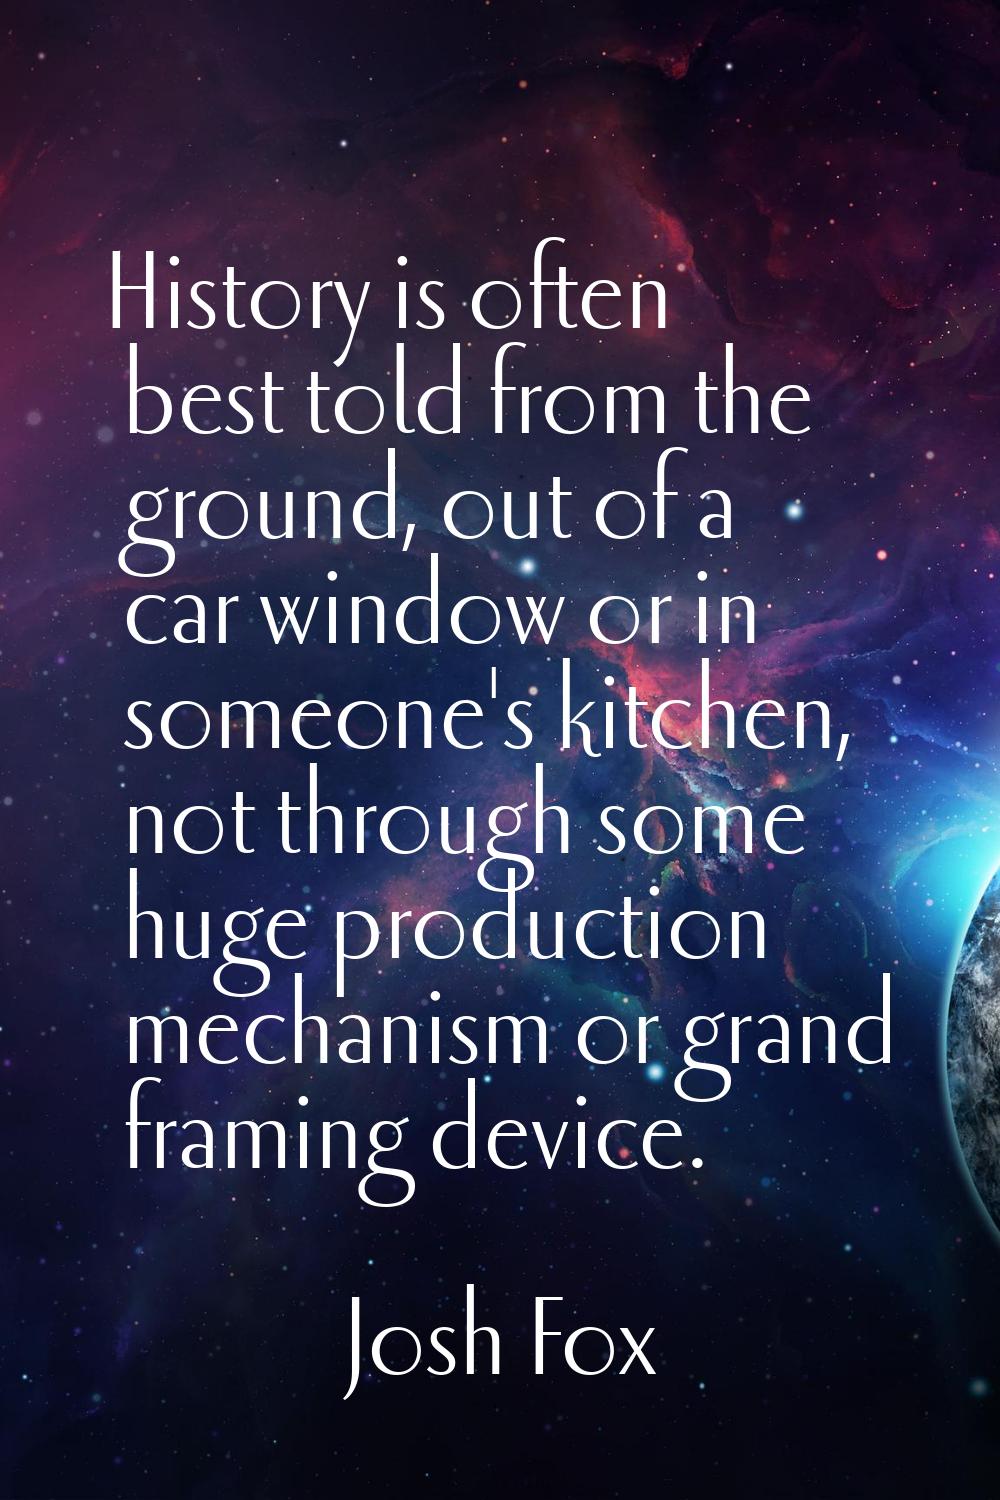 History is often best told from the ground, out of a car window or in someone's kitchen, not throug